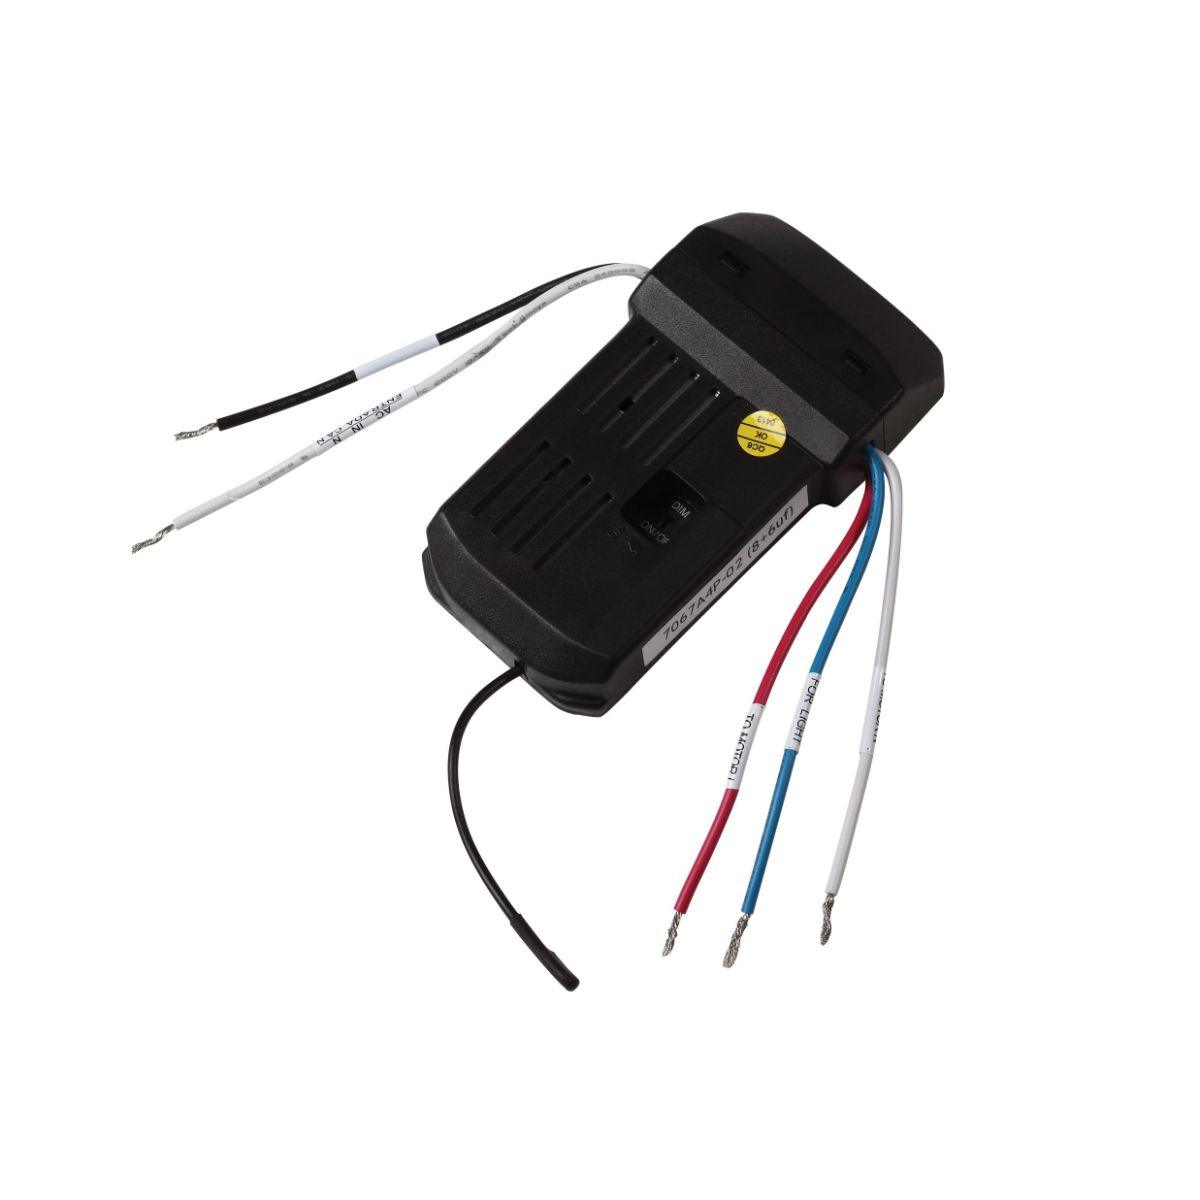 Canopy mounted 4-speed universal receiver Black - Bees Lighting